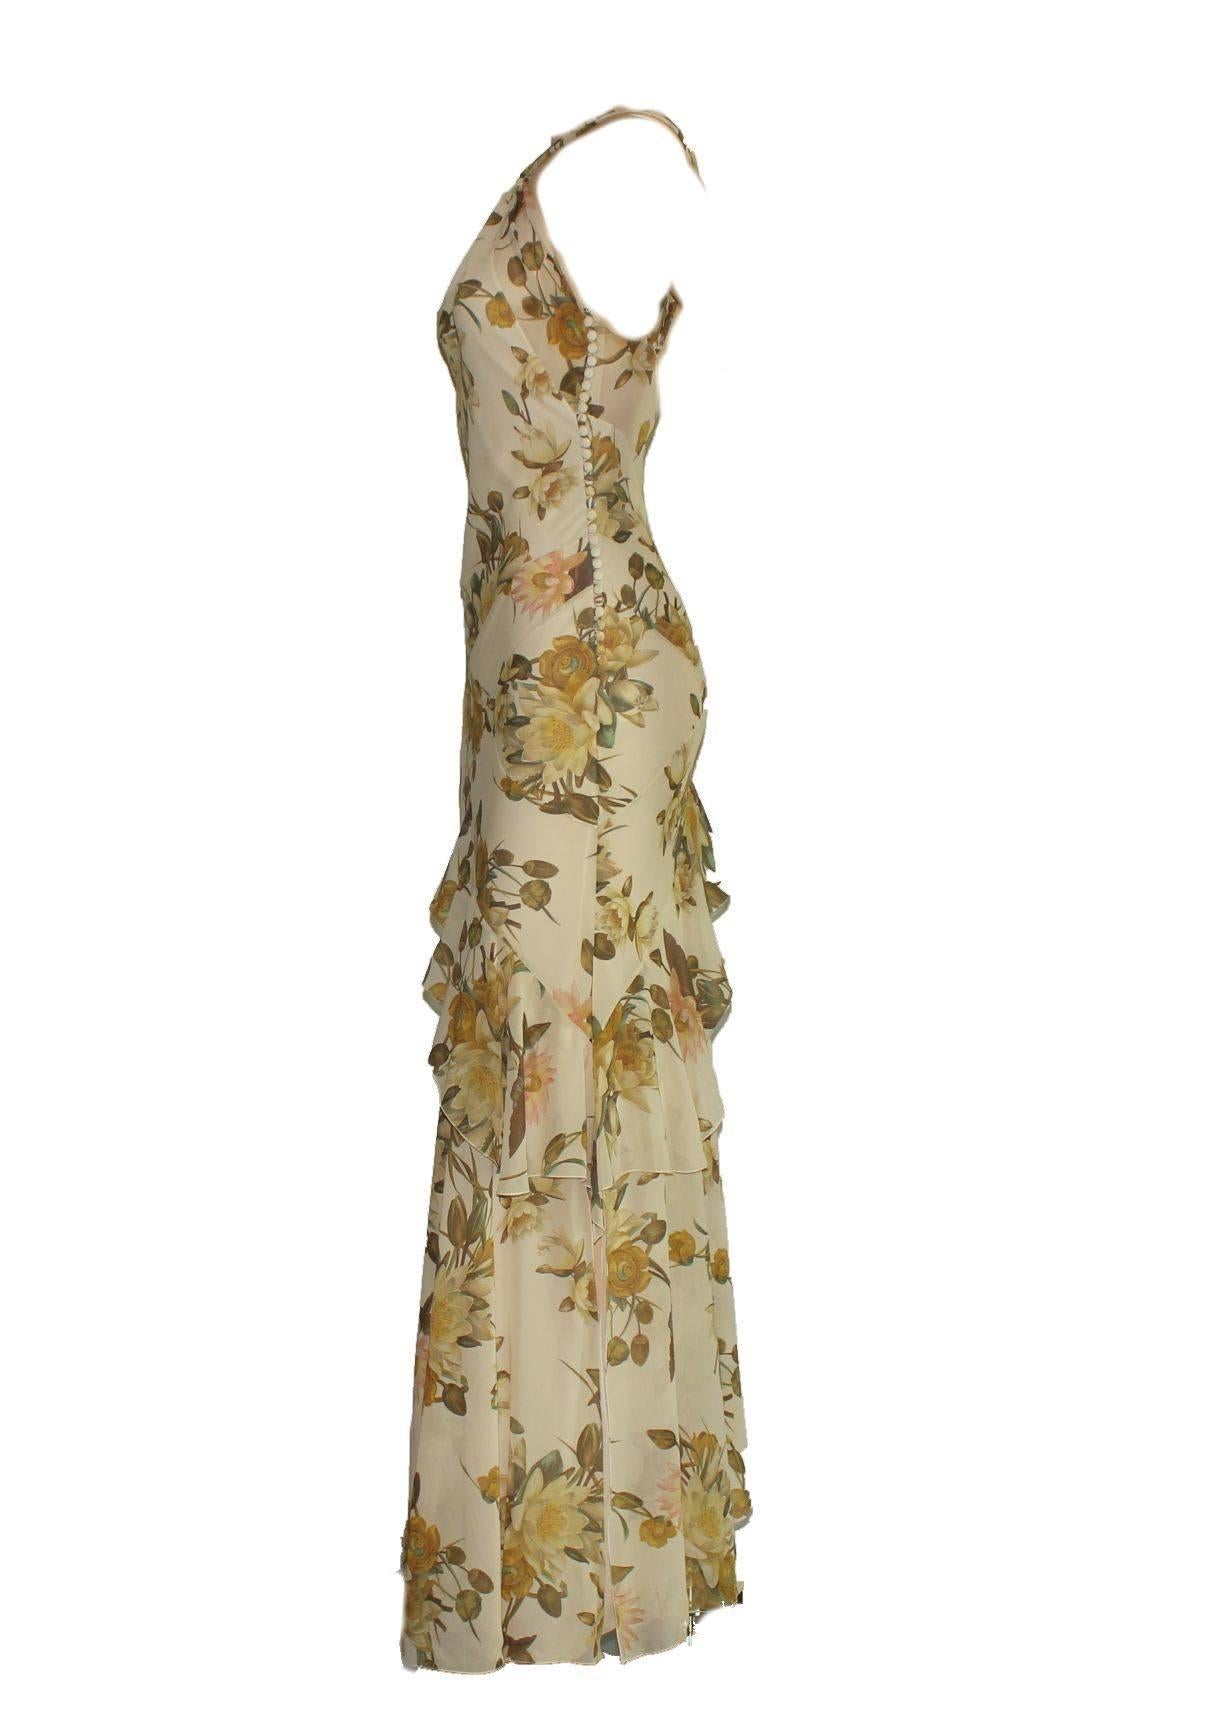 GORGEOUS 

CHRISTIAN DIOR 

FULL LENGTH SILK CHIFFON GOWN WITH MATCHING STOLA / SHAWL
 
A BEAUTIFUL TIMELESS DIOR PIECE THAT WILL LAST YOU FOR YEARS

DETAILS:

Amazing Christian Dior floral evening gown with matching maxi scarf

Beautifully printed